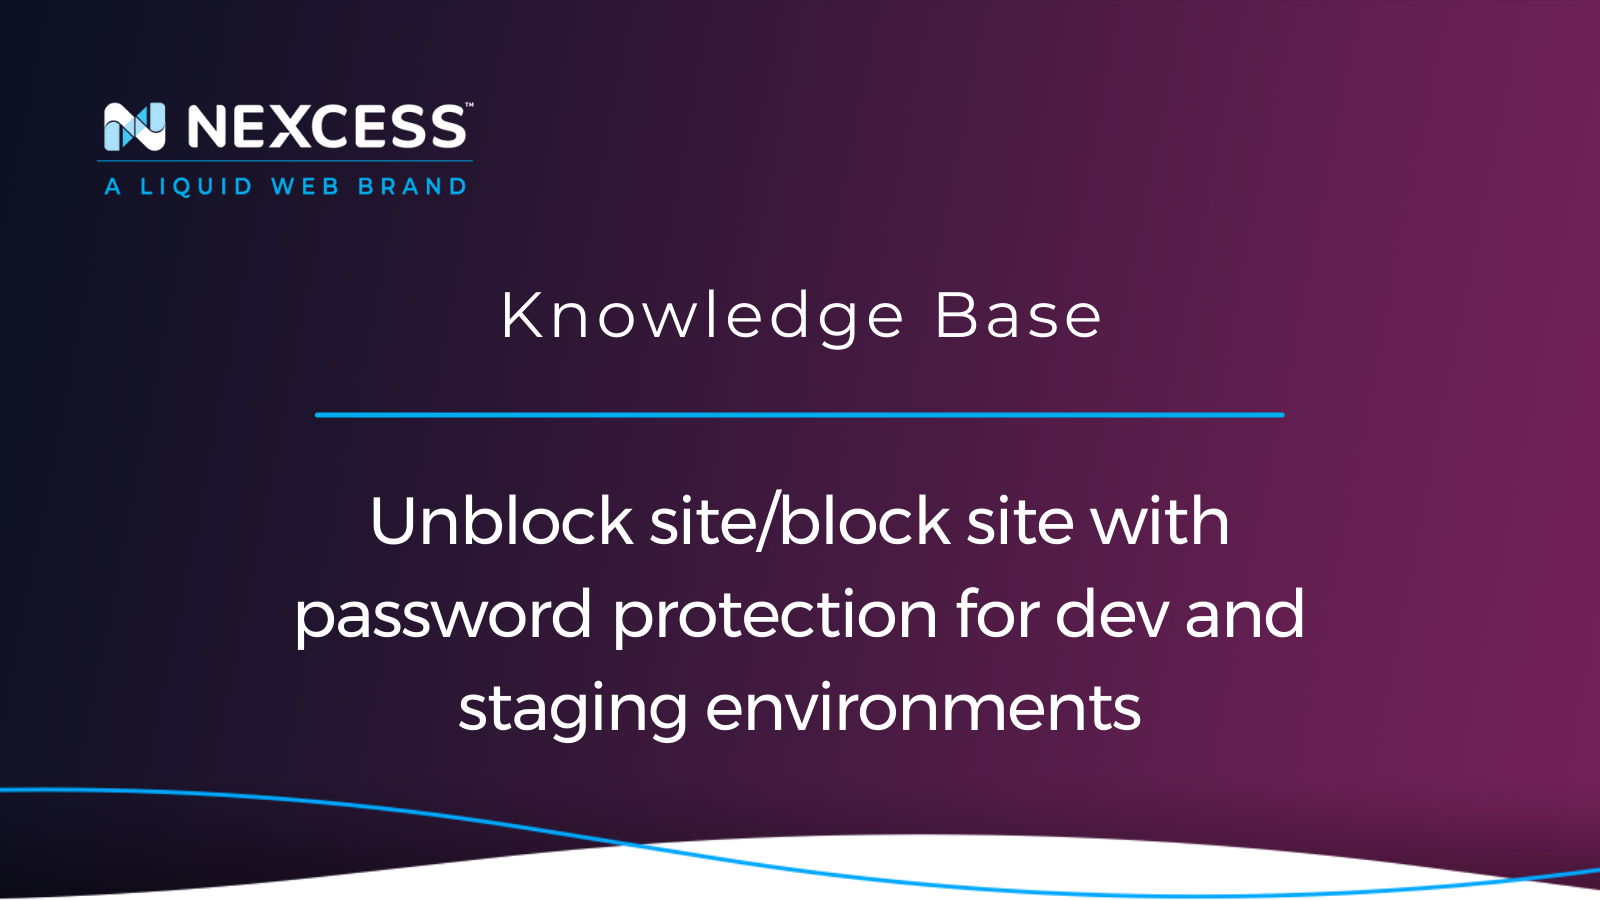 Unblock site/block site with password protection for dev and staging environments